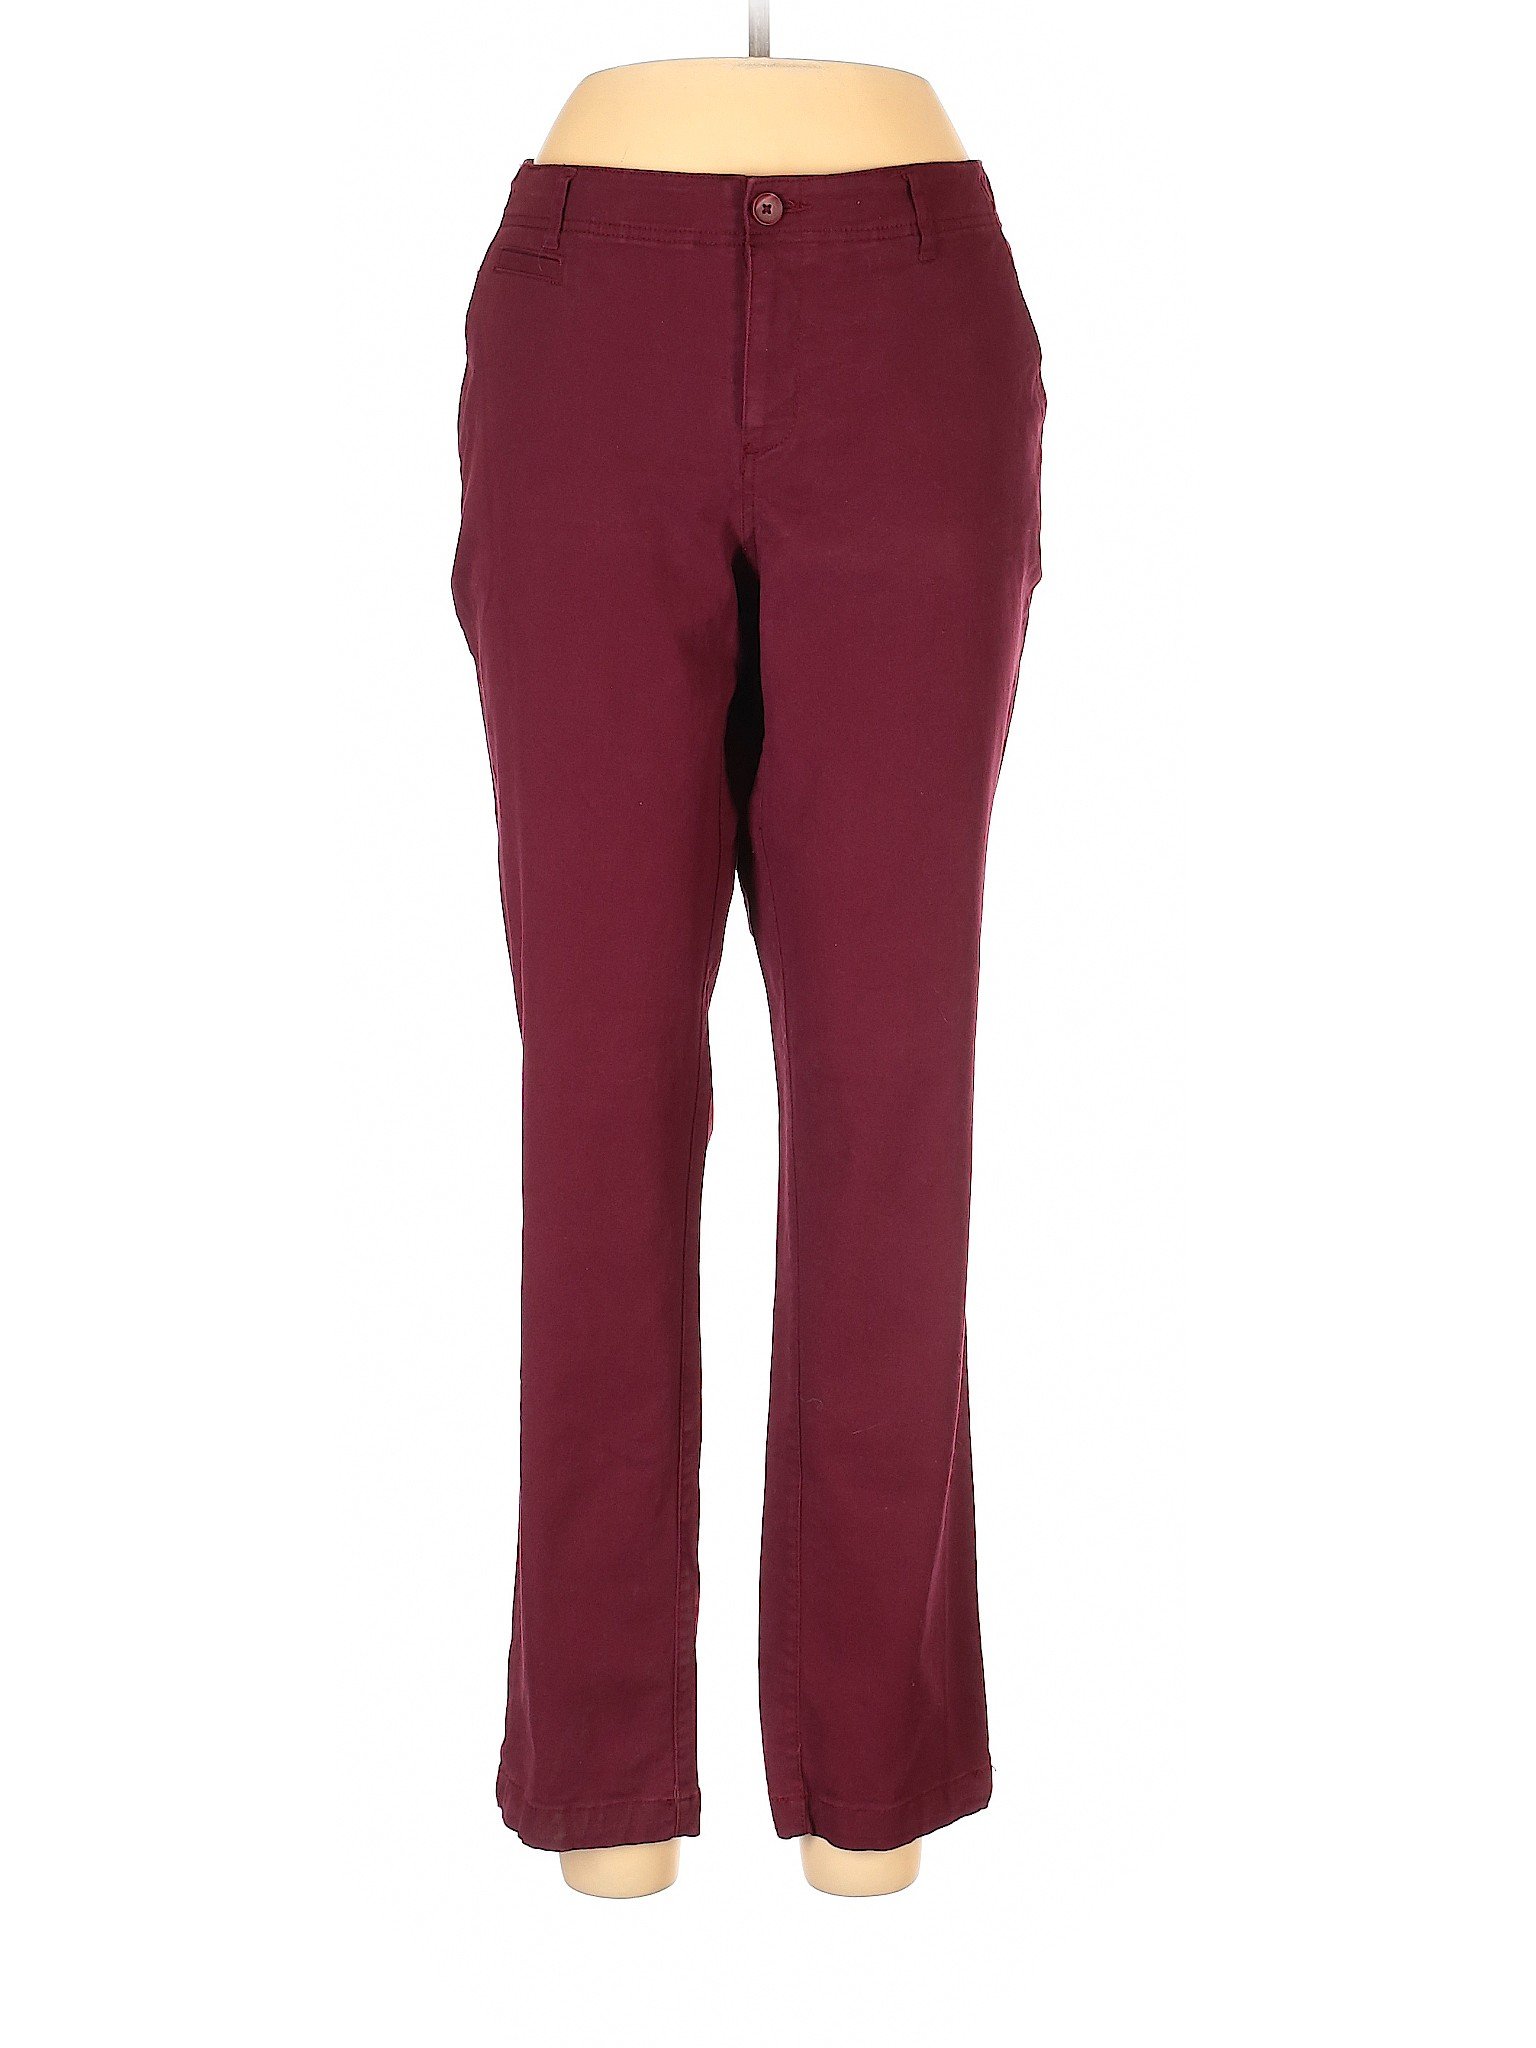 A New Day Solid Maroon Burgundy Khakis Size 10 - 70% off | thredUP